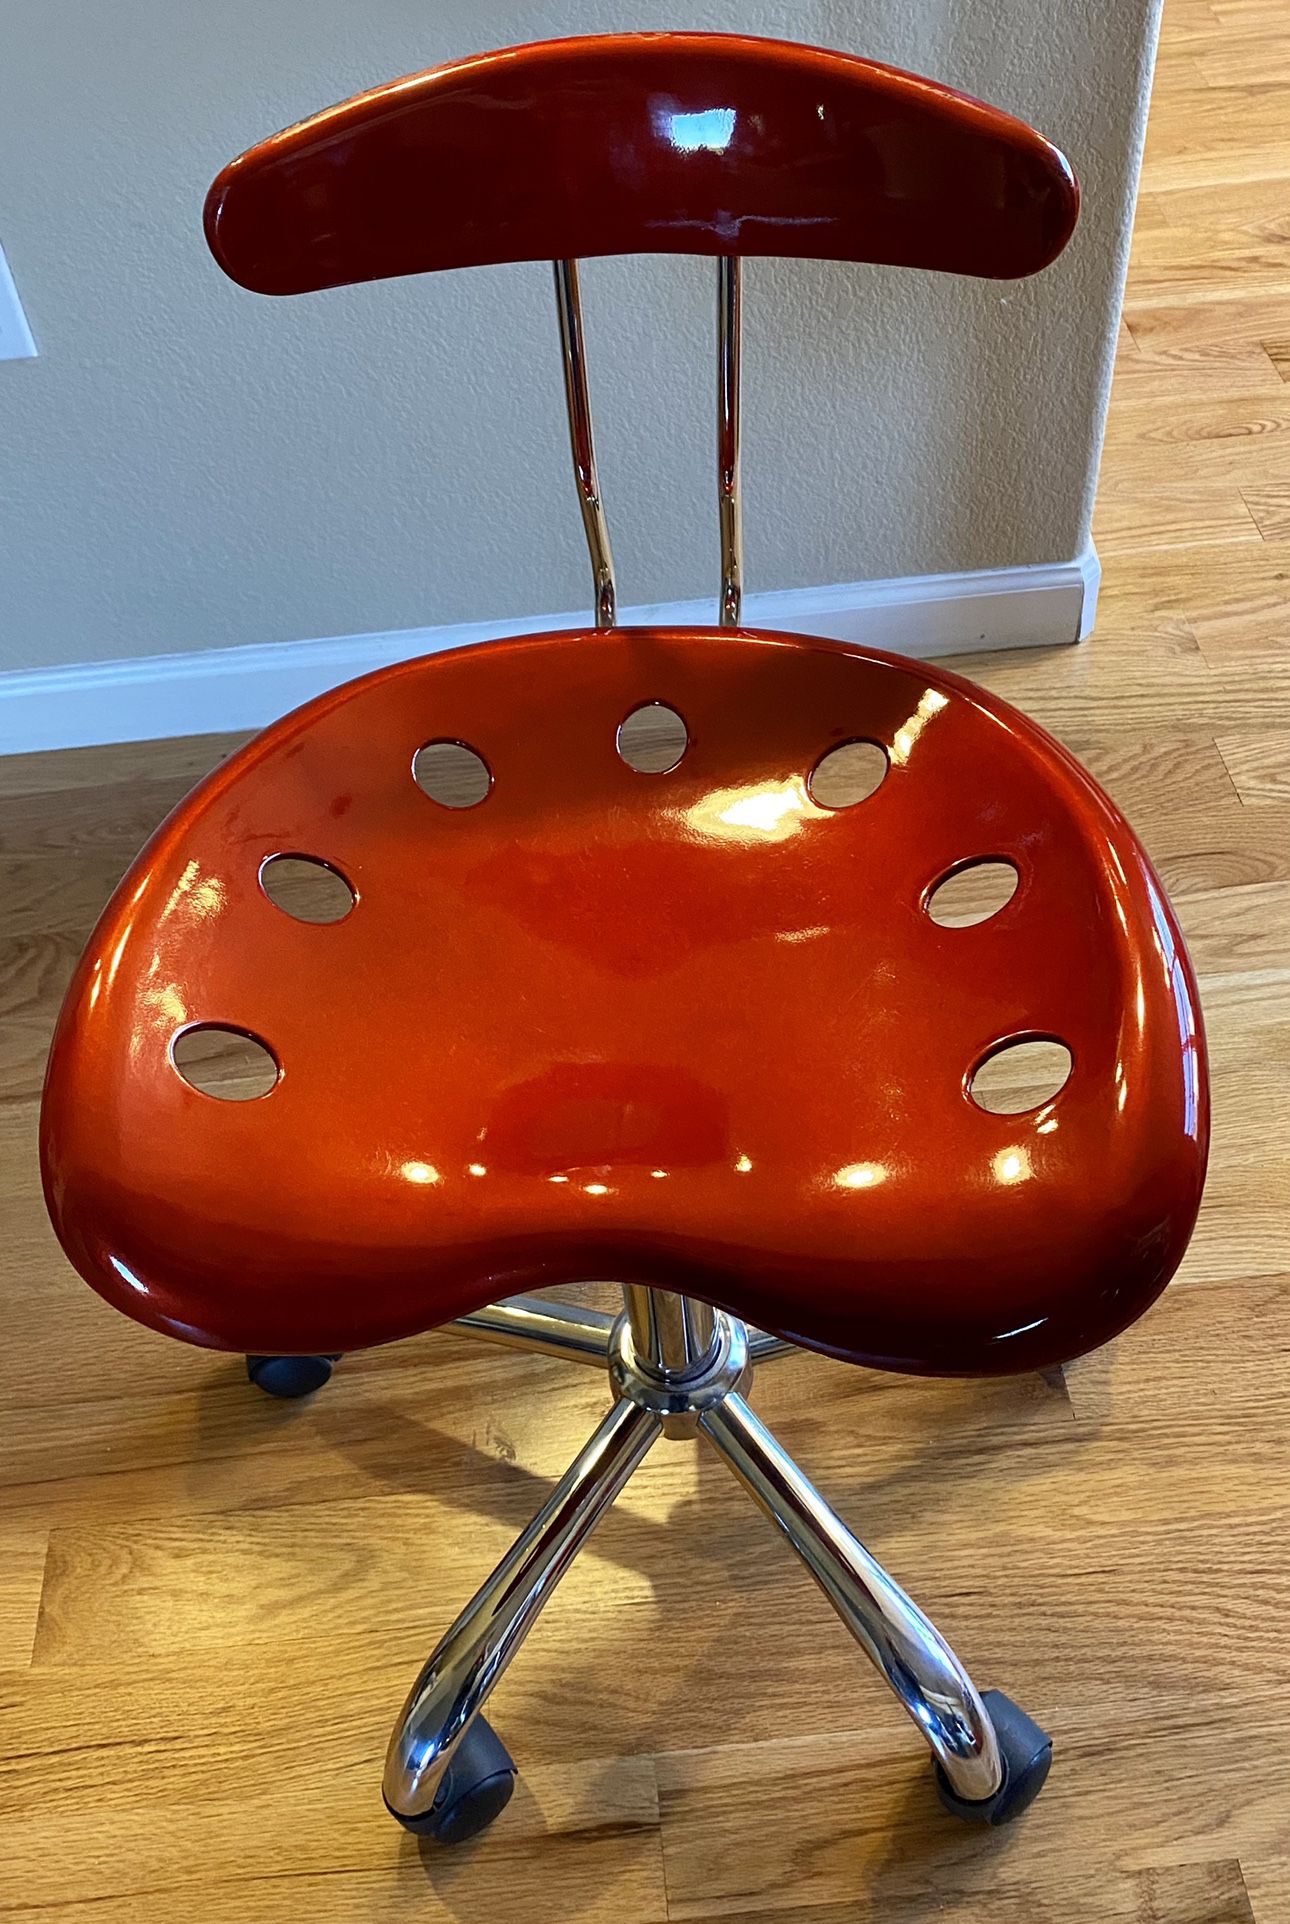 Tractor-Style Seat Rolling Adjustable Height office Chair - Shiny Candy Apple Red - Unique Furniture